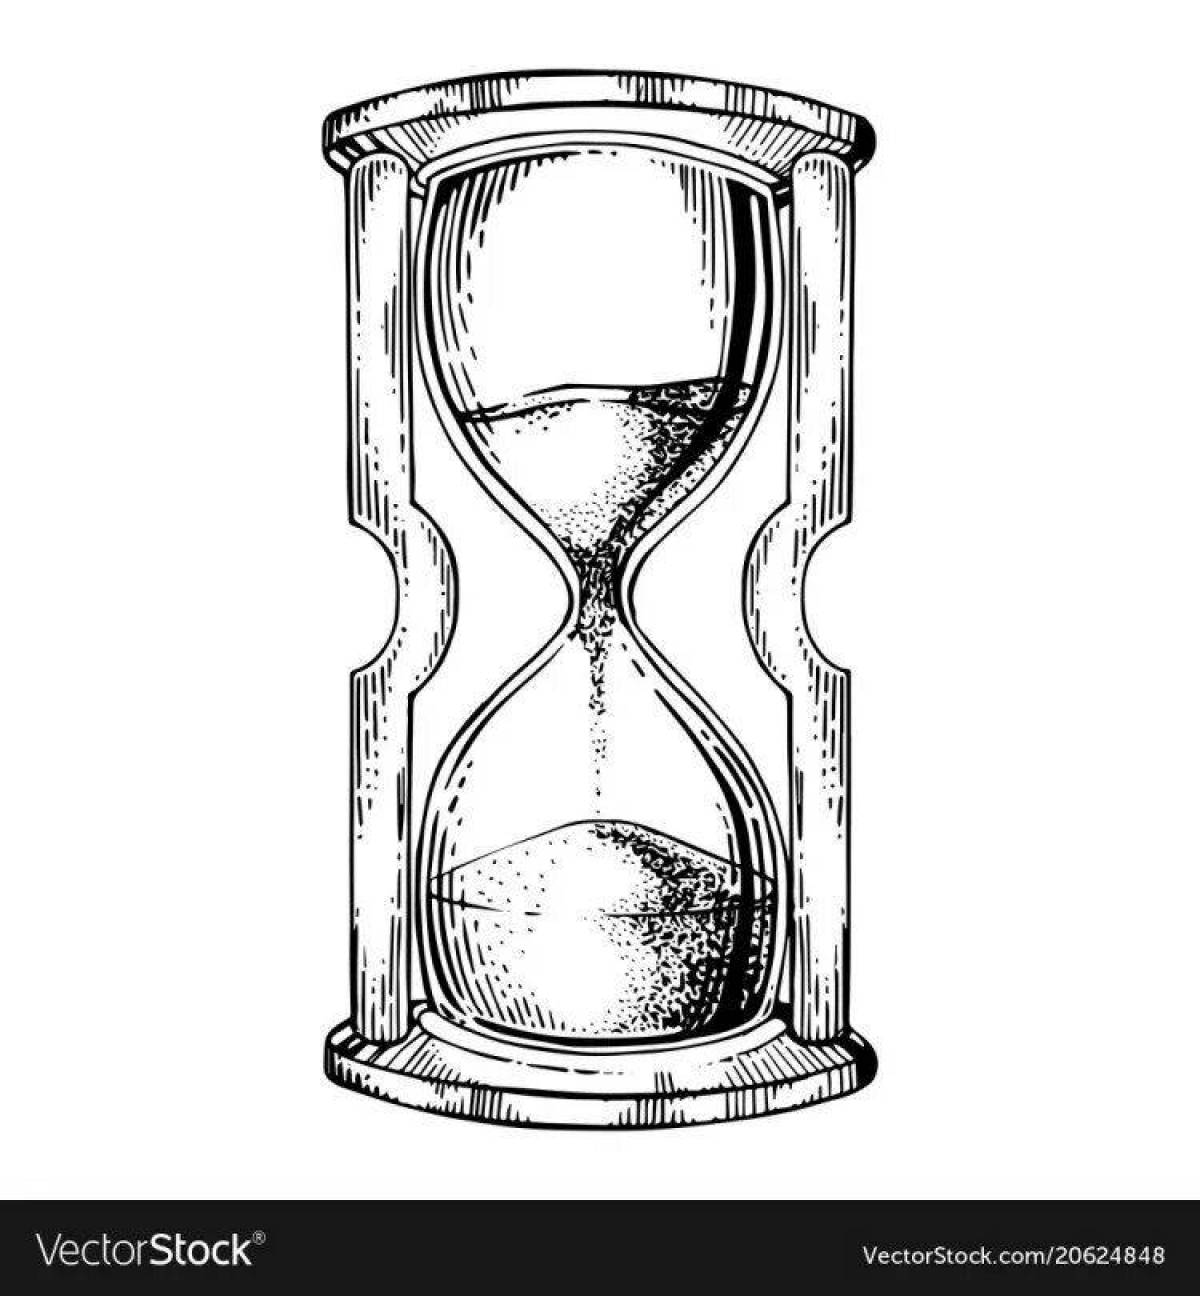 Dazzling hourglass coloring page